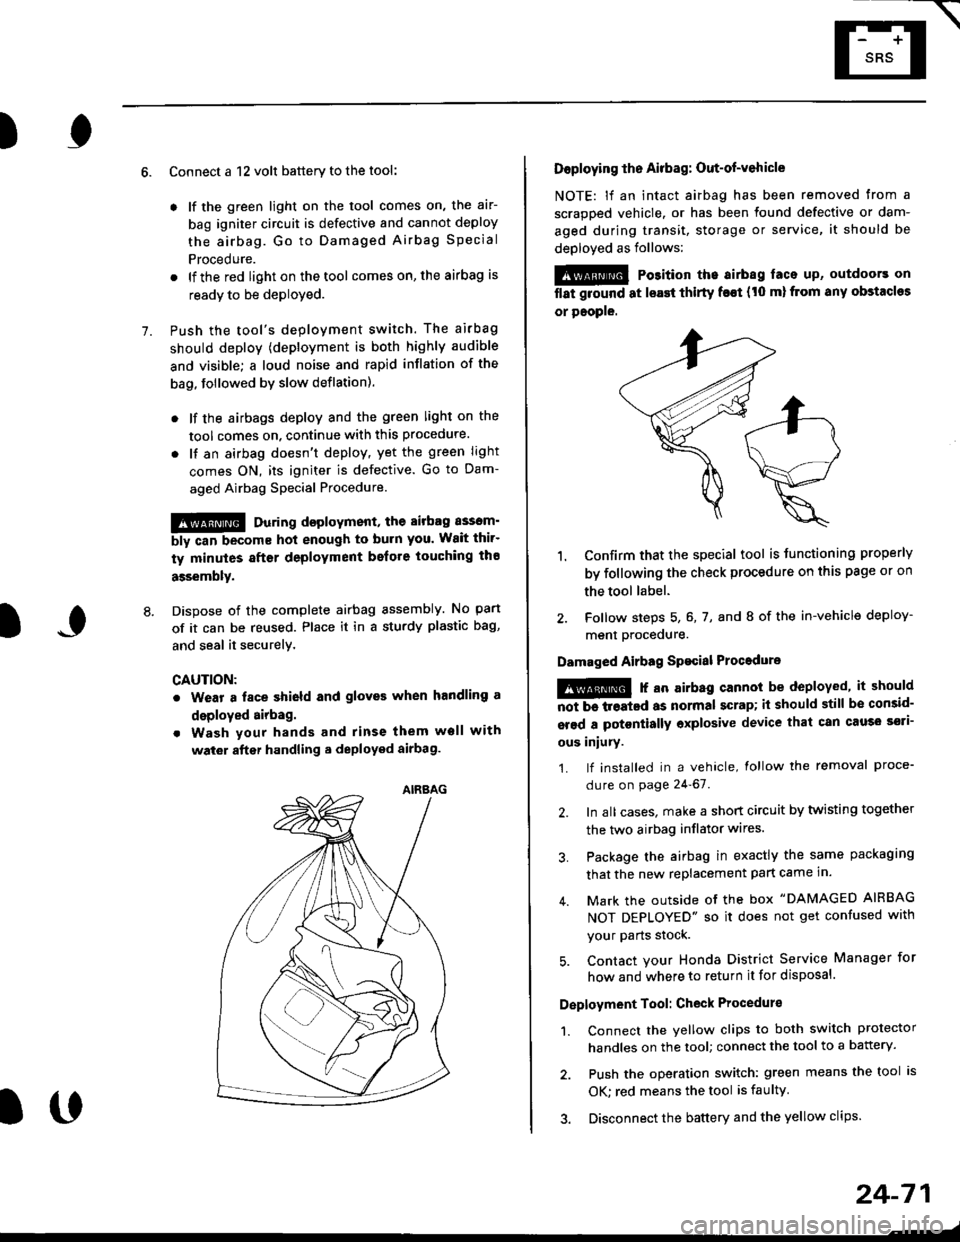 HONDA CIVIC 1998 6.G Owners Manual E-
)I
Connect a 12 volt battery to the tool:
. lf the green light on the tool comes on, the aar-
bag igniter circuit is defective and cannot deploy
the airbag. Go to Damaged Airbag Special
Procedure.
